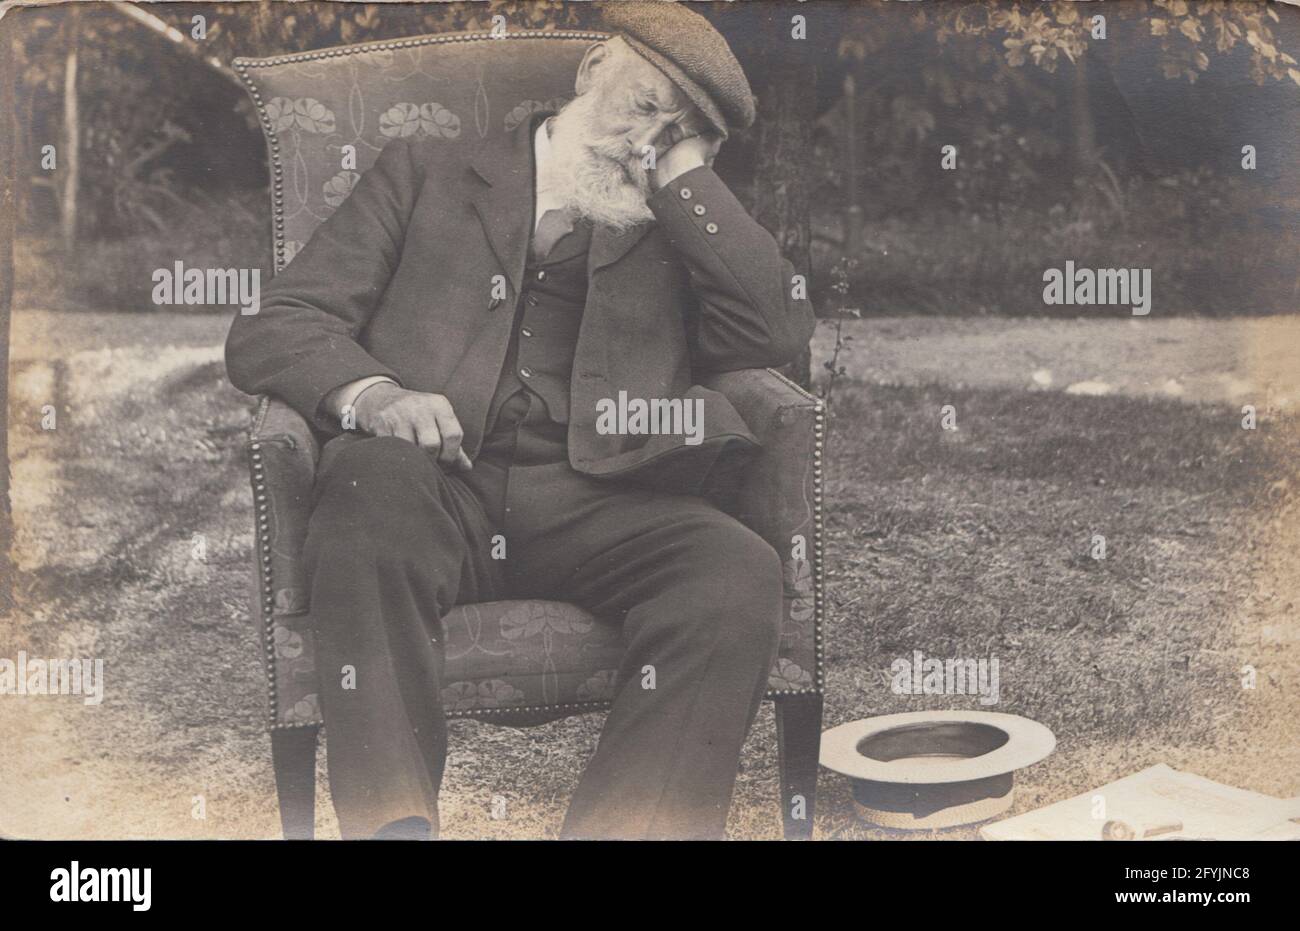 Vintage Early 20th Century Photographic Postcard Showing an elderly man with a white beard and wearing a suit and cloth cap snoozing outdoors in his chair. Stock Photo